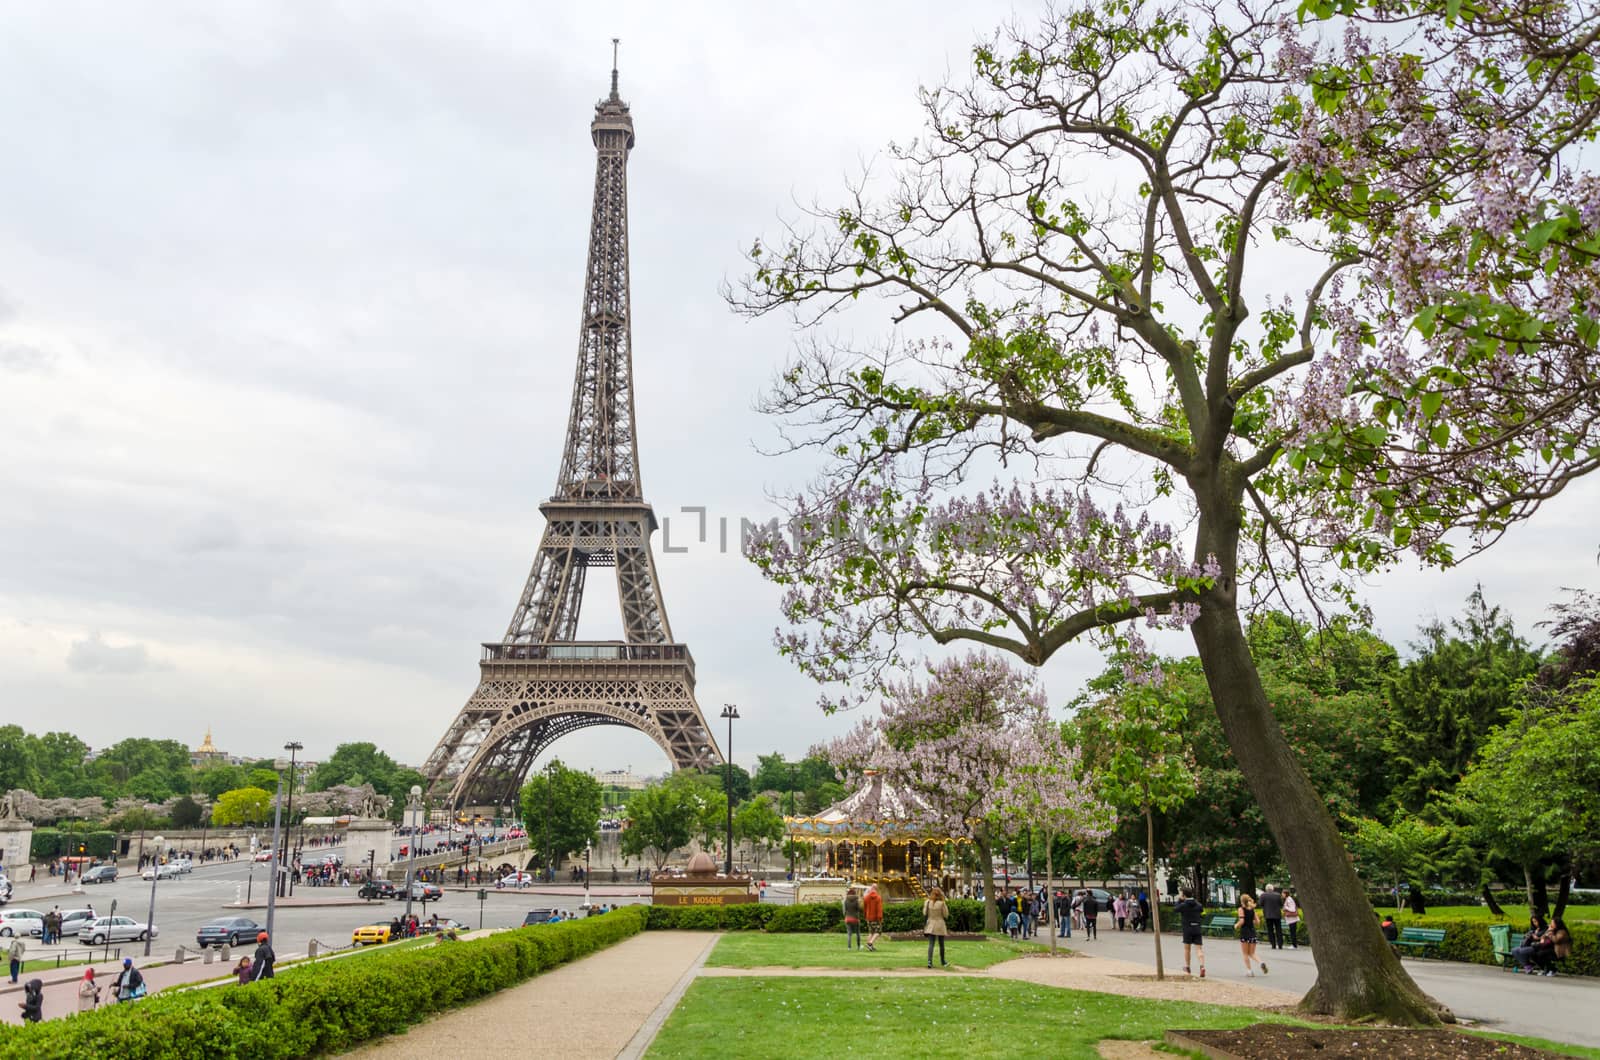 Paris, France - May 15, 2015: Tourist visit Eiffel Tower View from Esplanade du Trocadero on May 15, 2015. This spot at the Esplanade du Trocadero has the best view of the iconic landmark and attracts huge crowds daily.